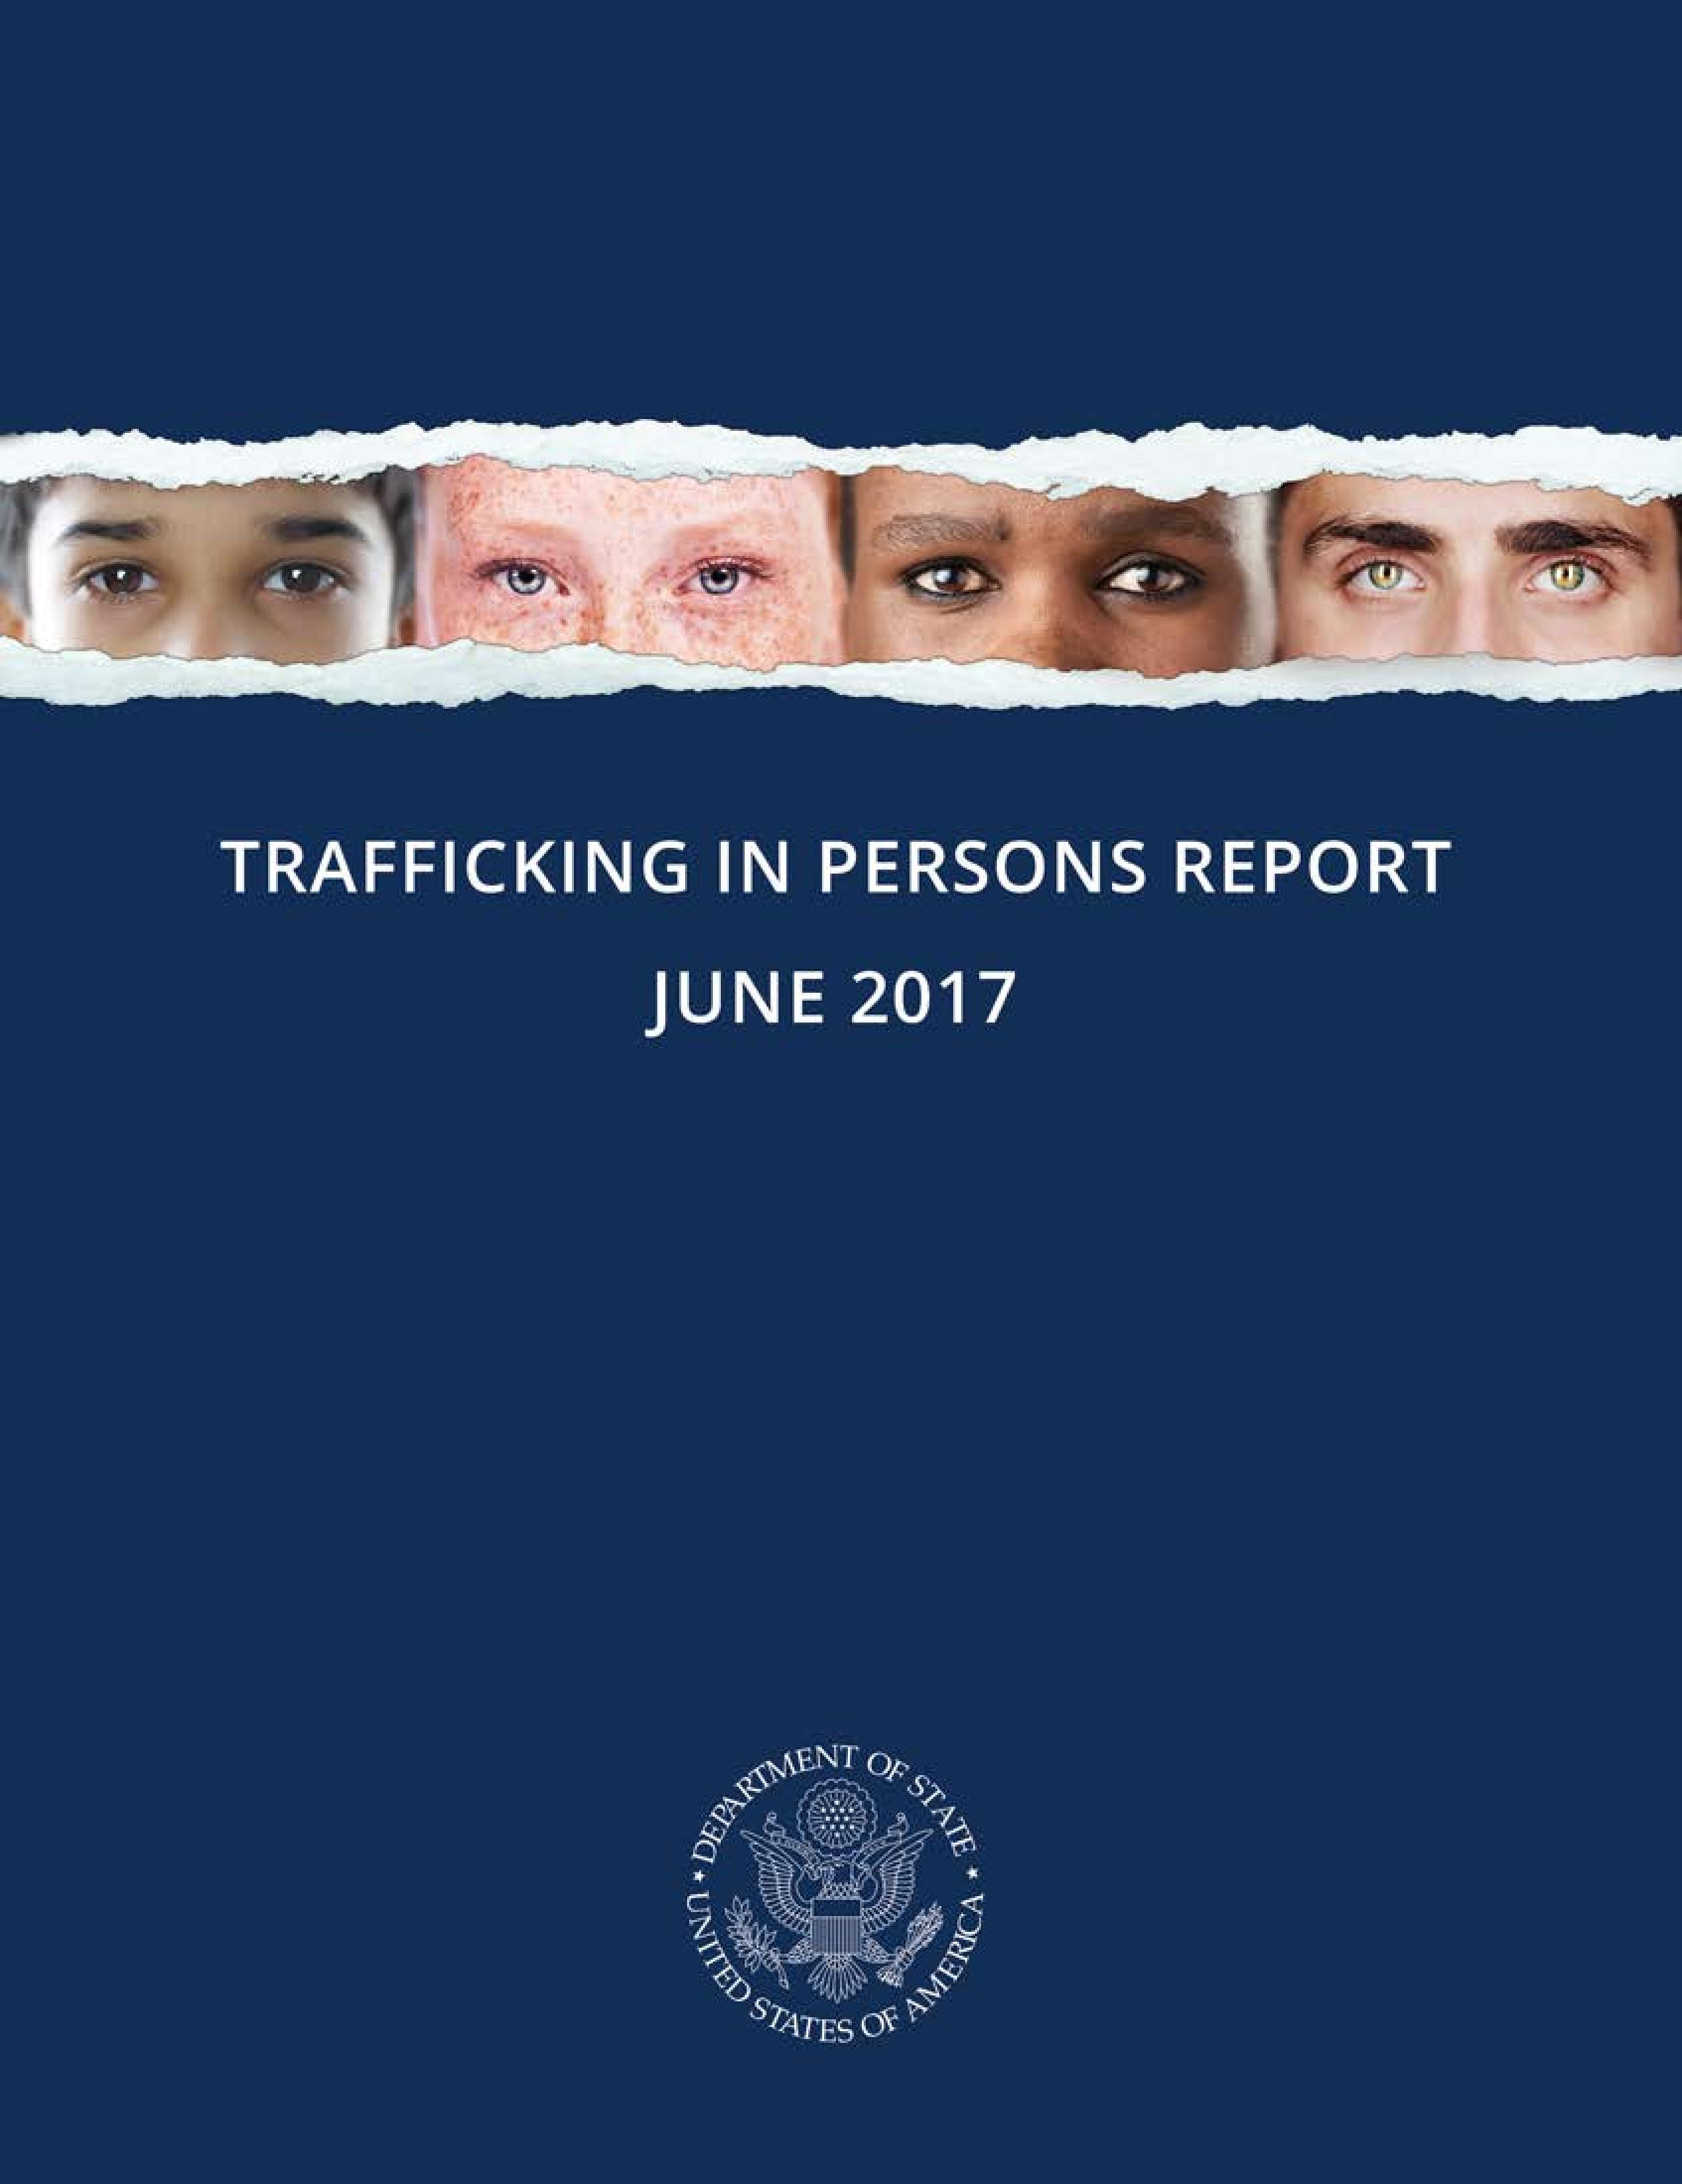 U.S. Trafficking in Persons Report: Child Trafficking to and from Orphanages